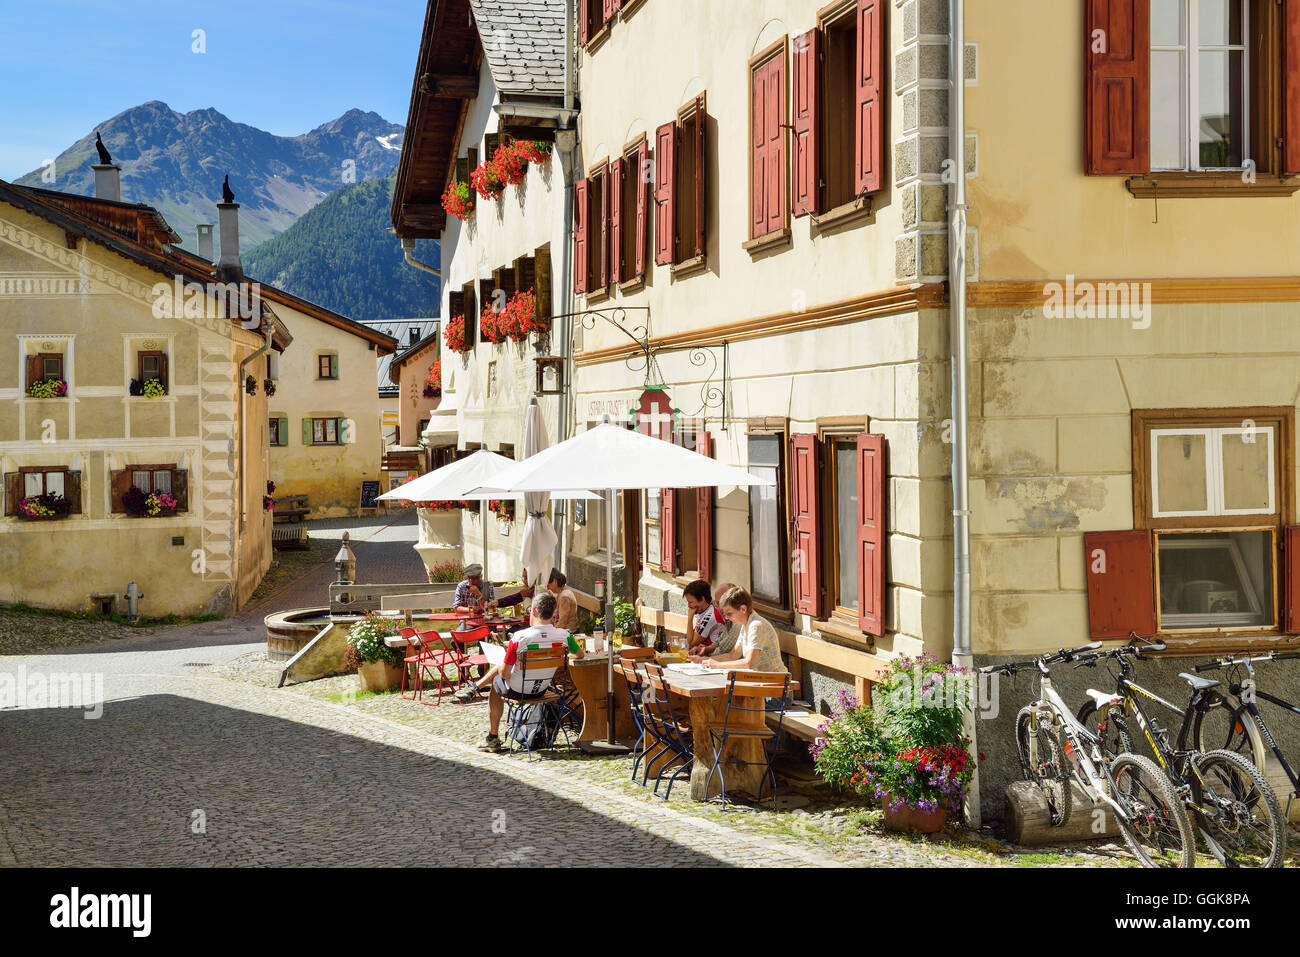 Guests in a pavement cafe, Guarda, Lower Engadin, Canton of Graubuenden, Switzerland Stock Photo